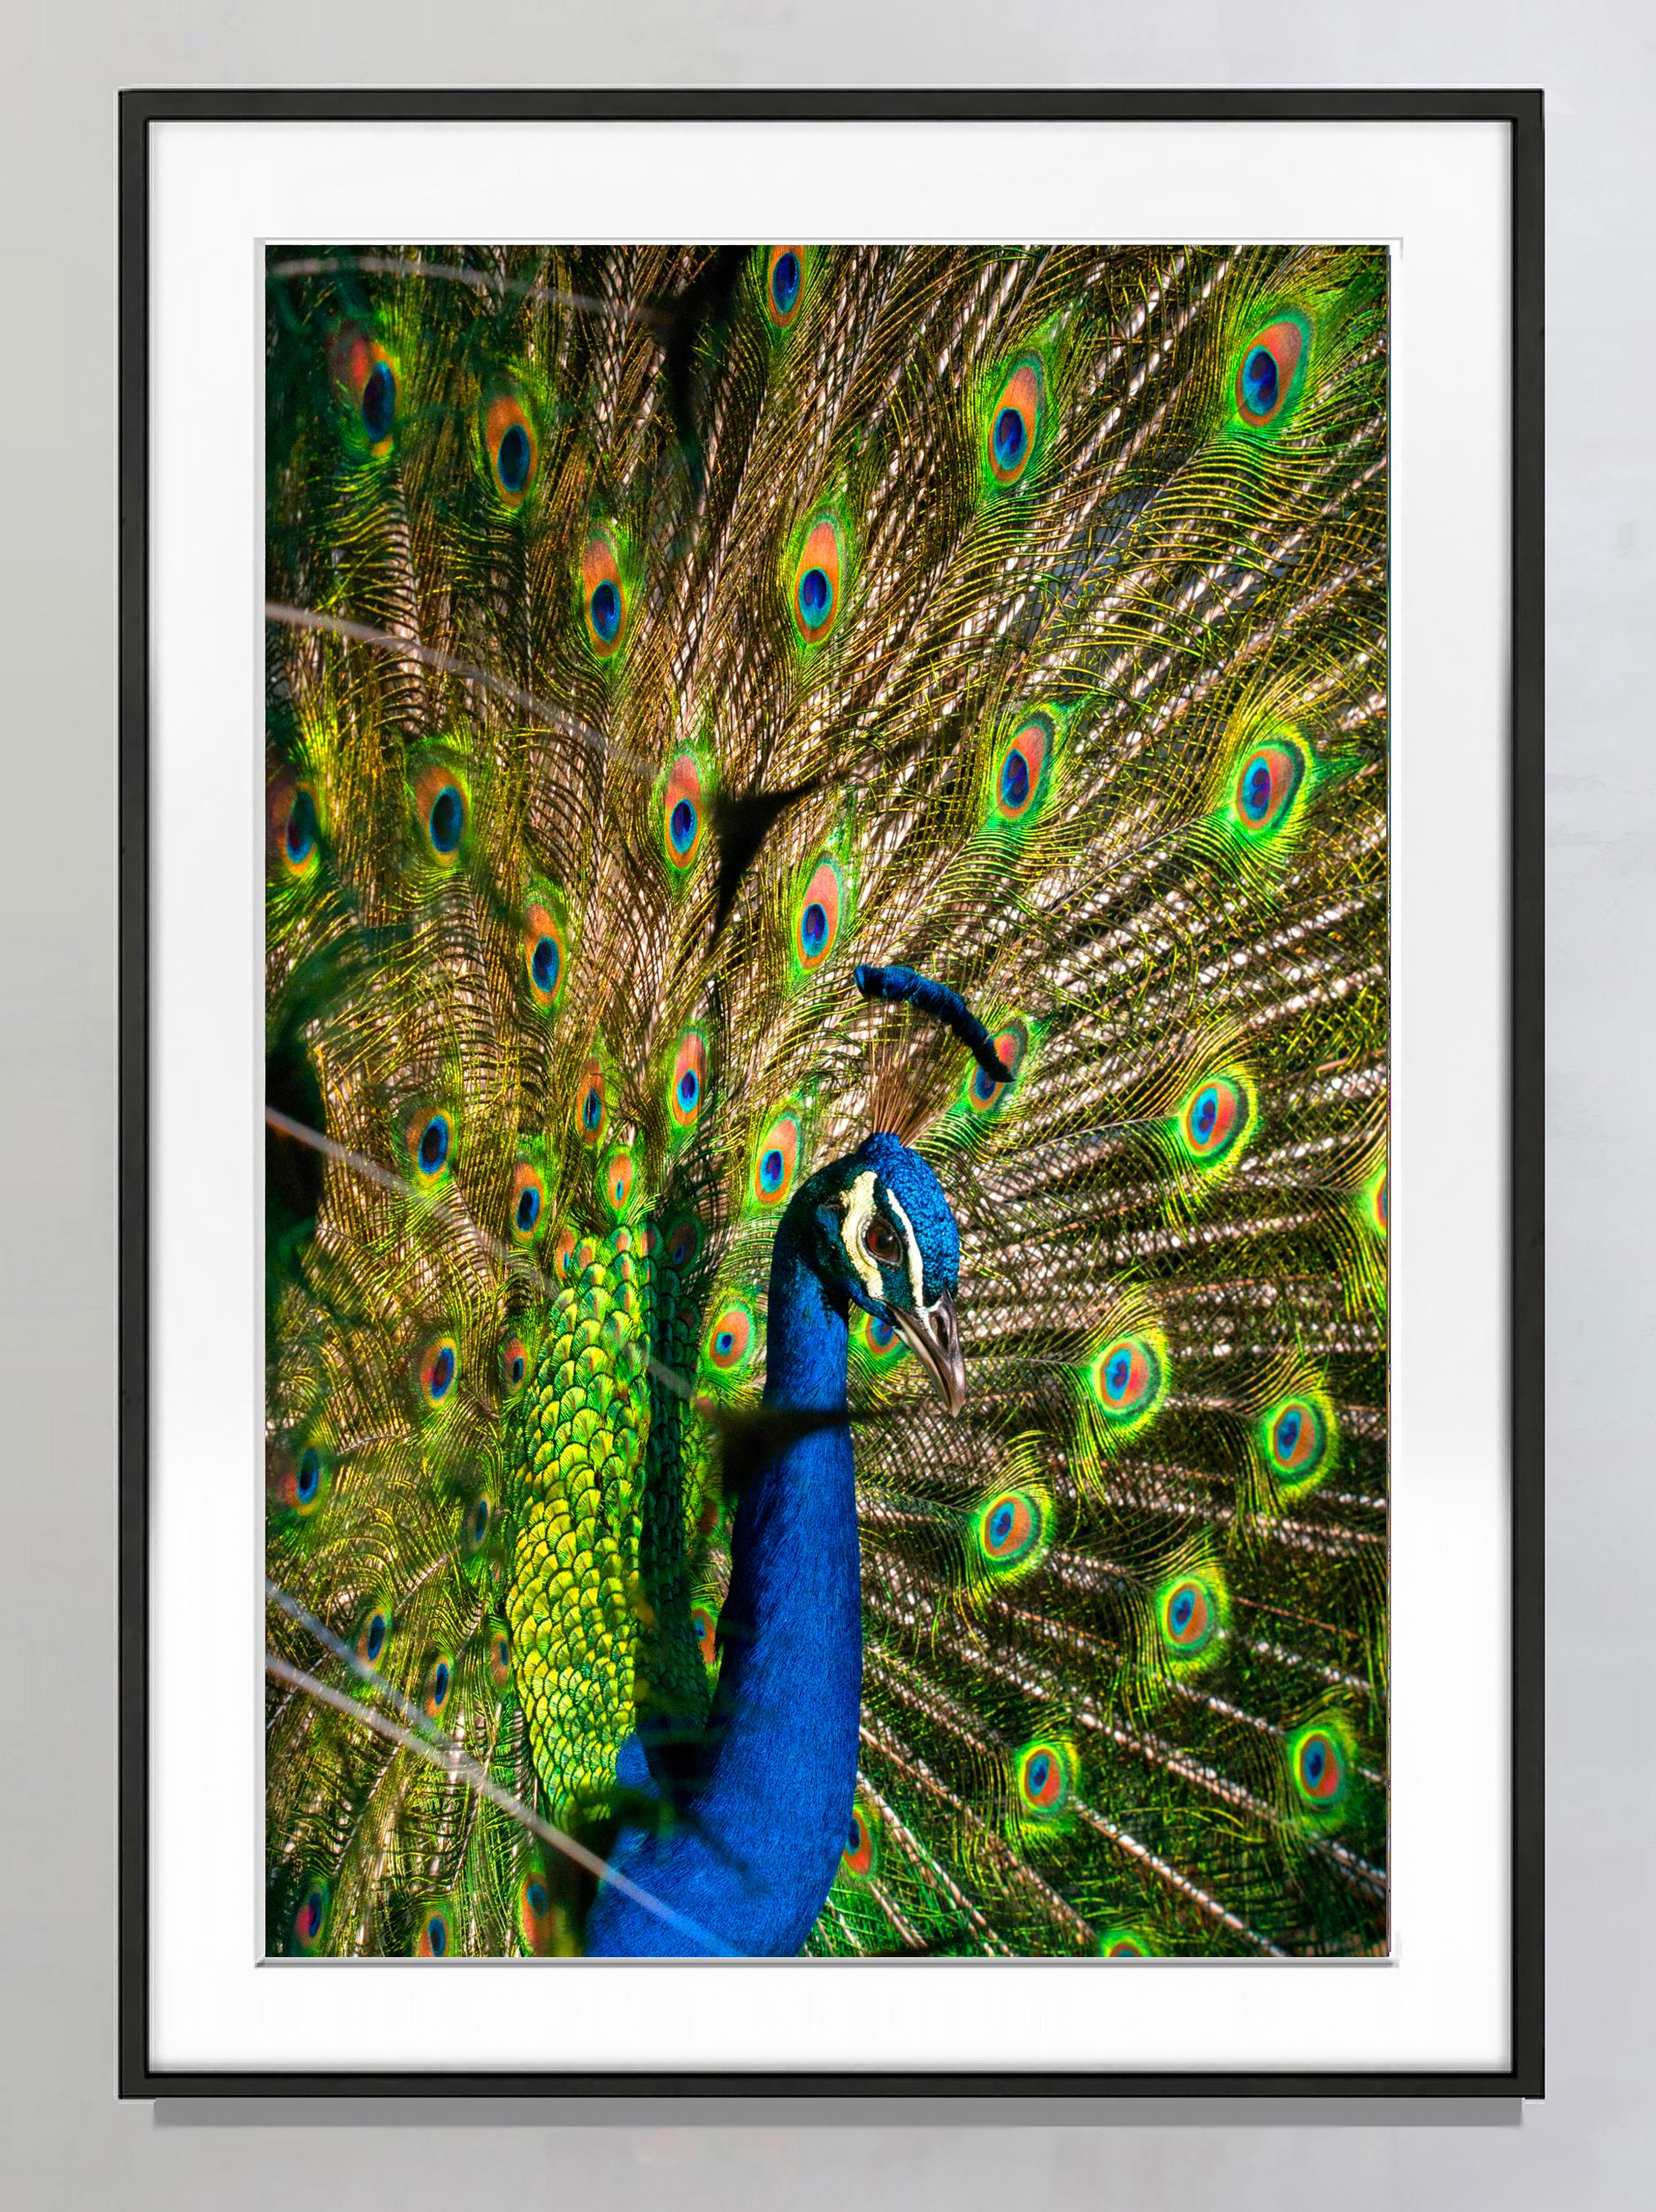 Peacock Blue and Green. Colorful Pheasants - Photograph by Robert Funk